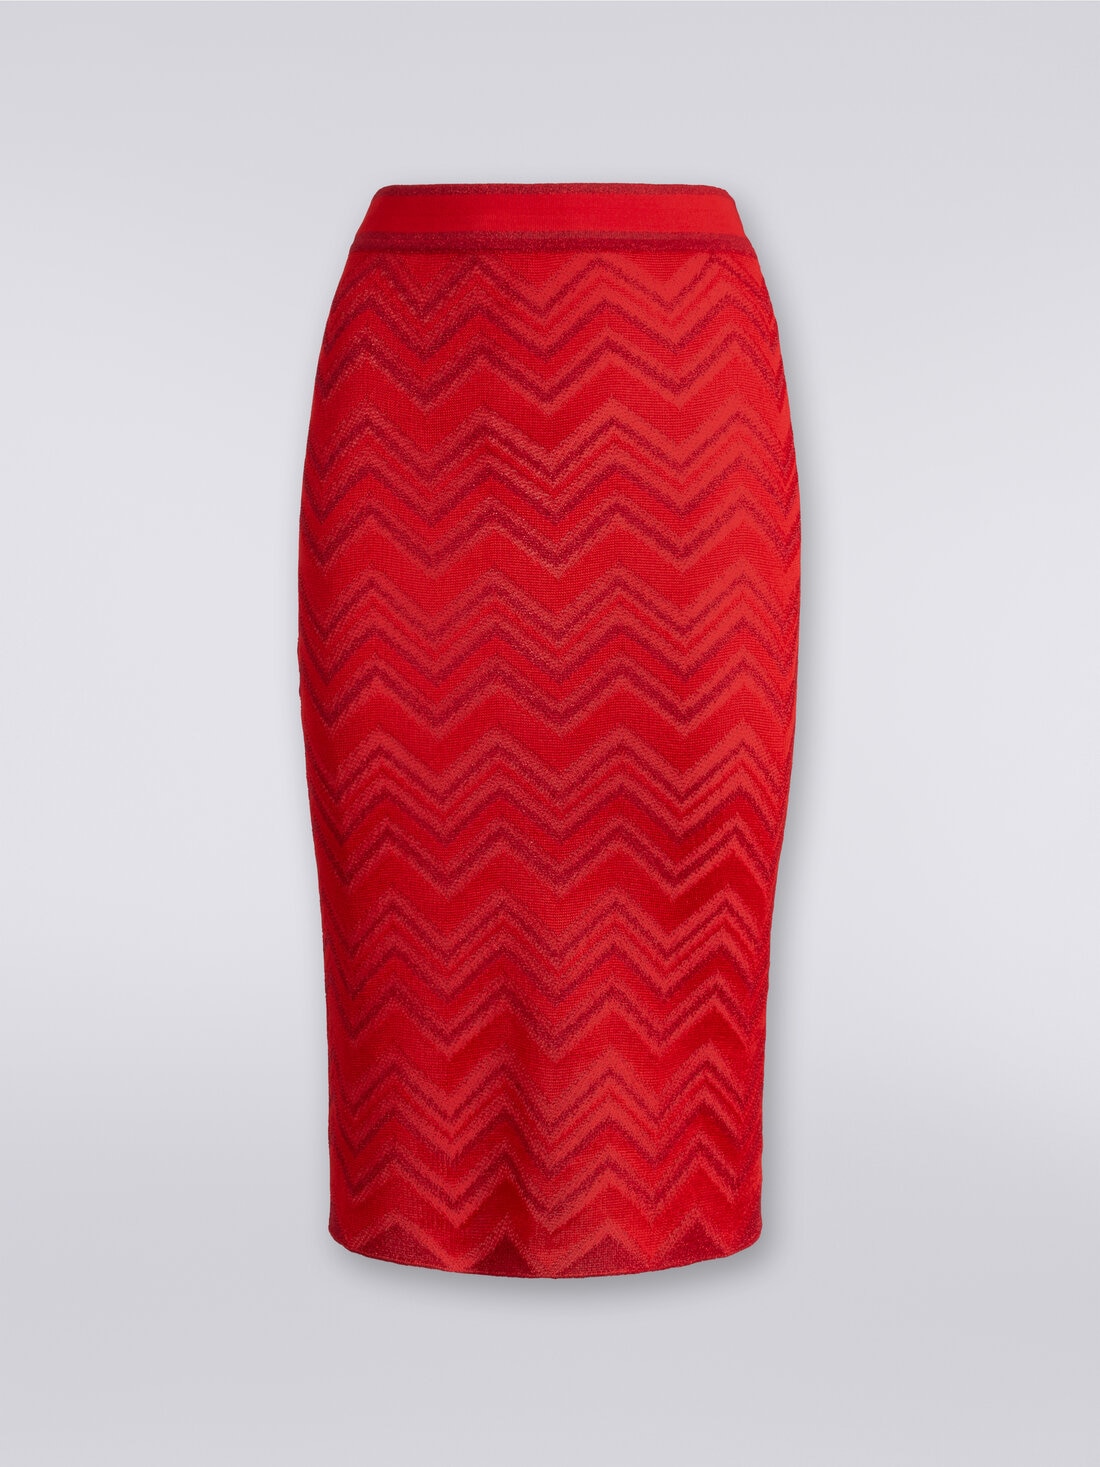 Longuette skirt in zigzag knit with lurex, Red  - DS24SH0TBK034J81756 - 0